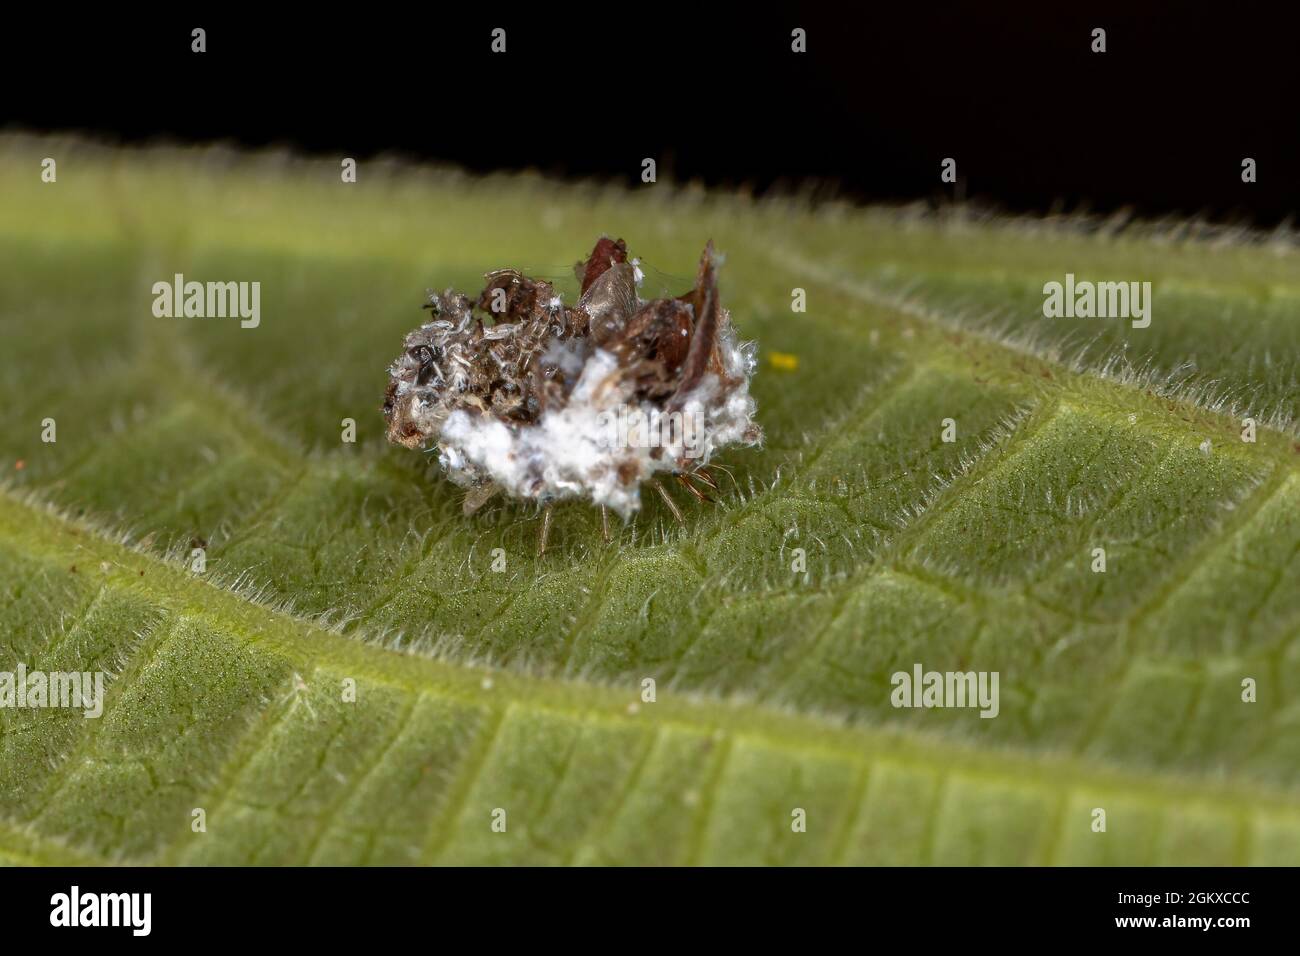 Green Lacewing Larva of the Family Chrysopidae Stock Photo